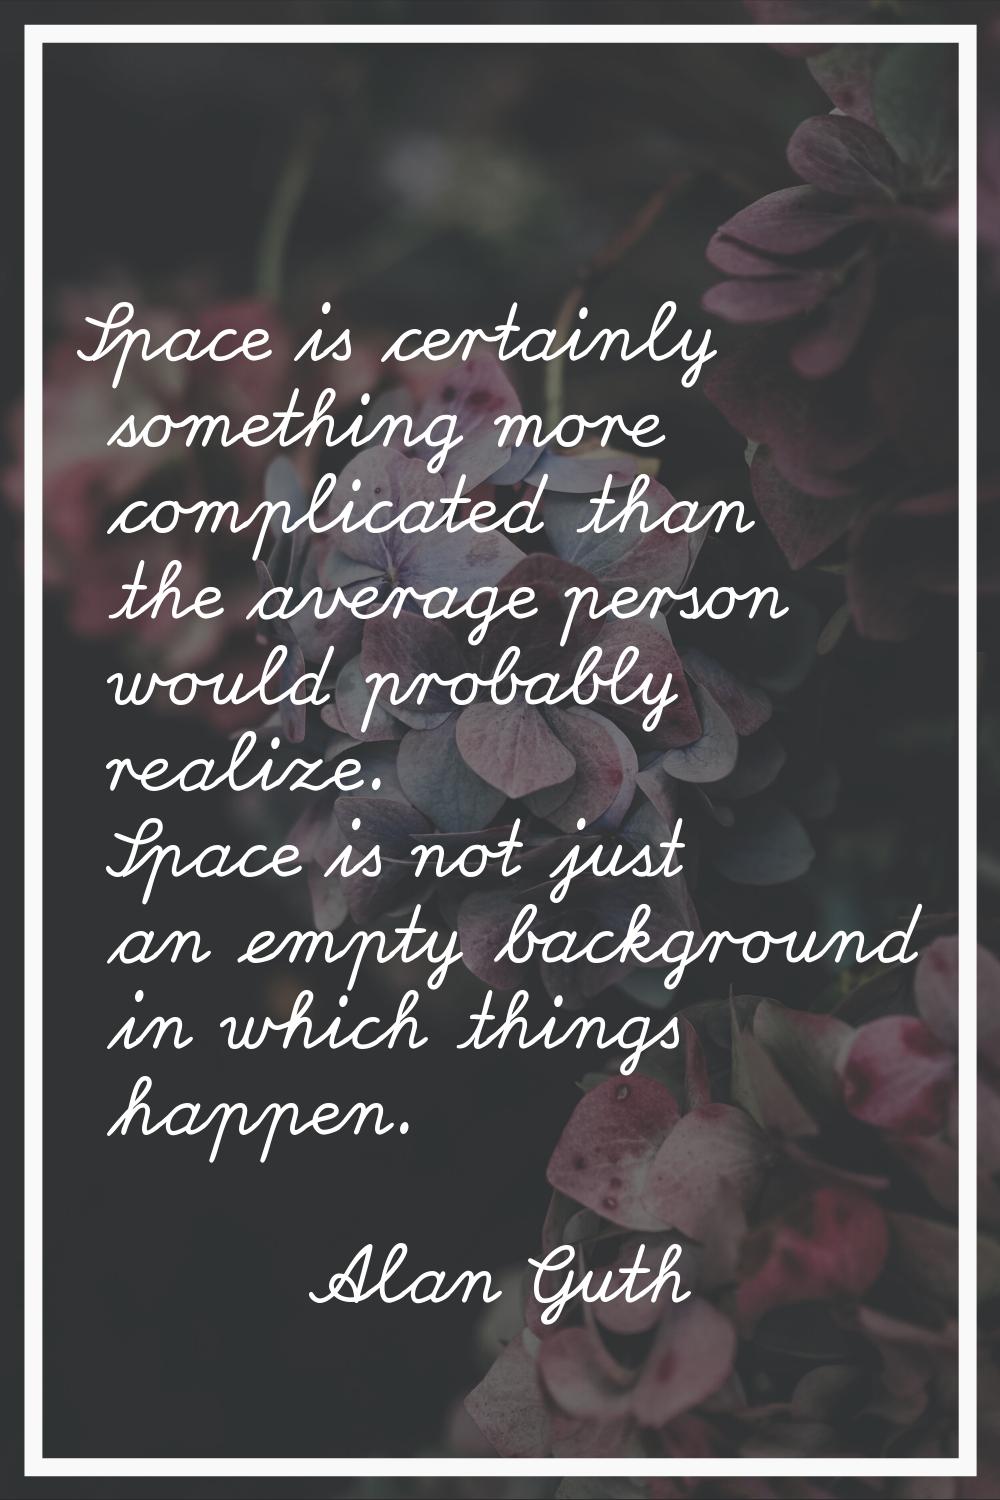 Space is certainly something more complicated than the average person would probably realize. Space